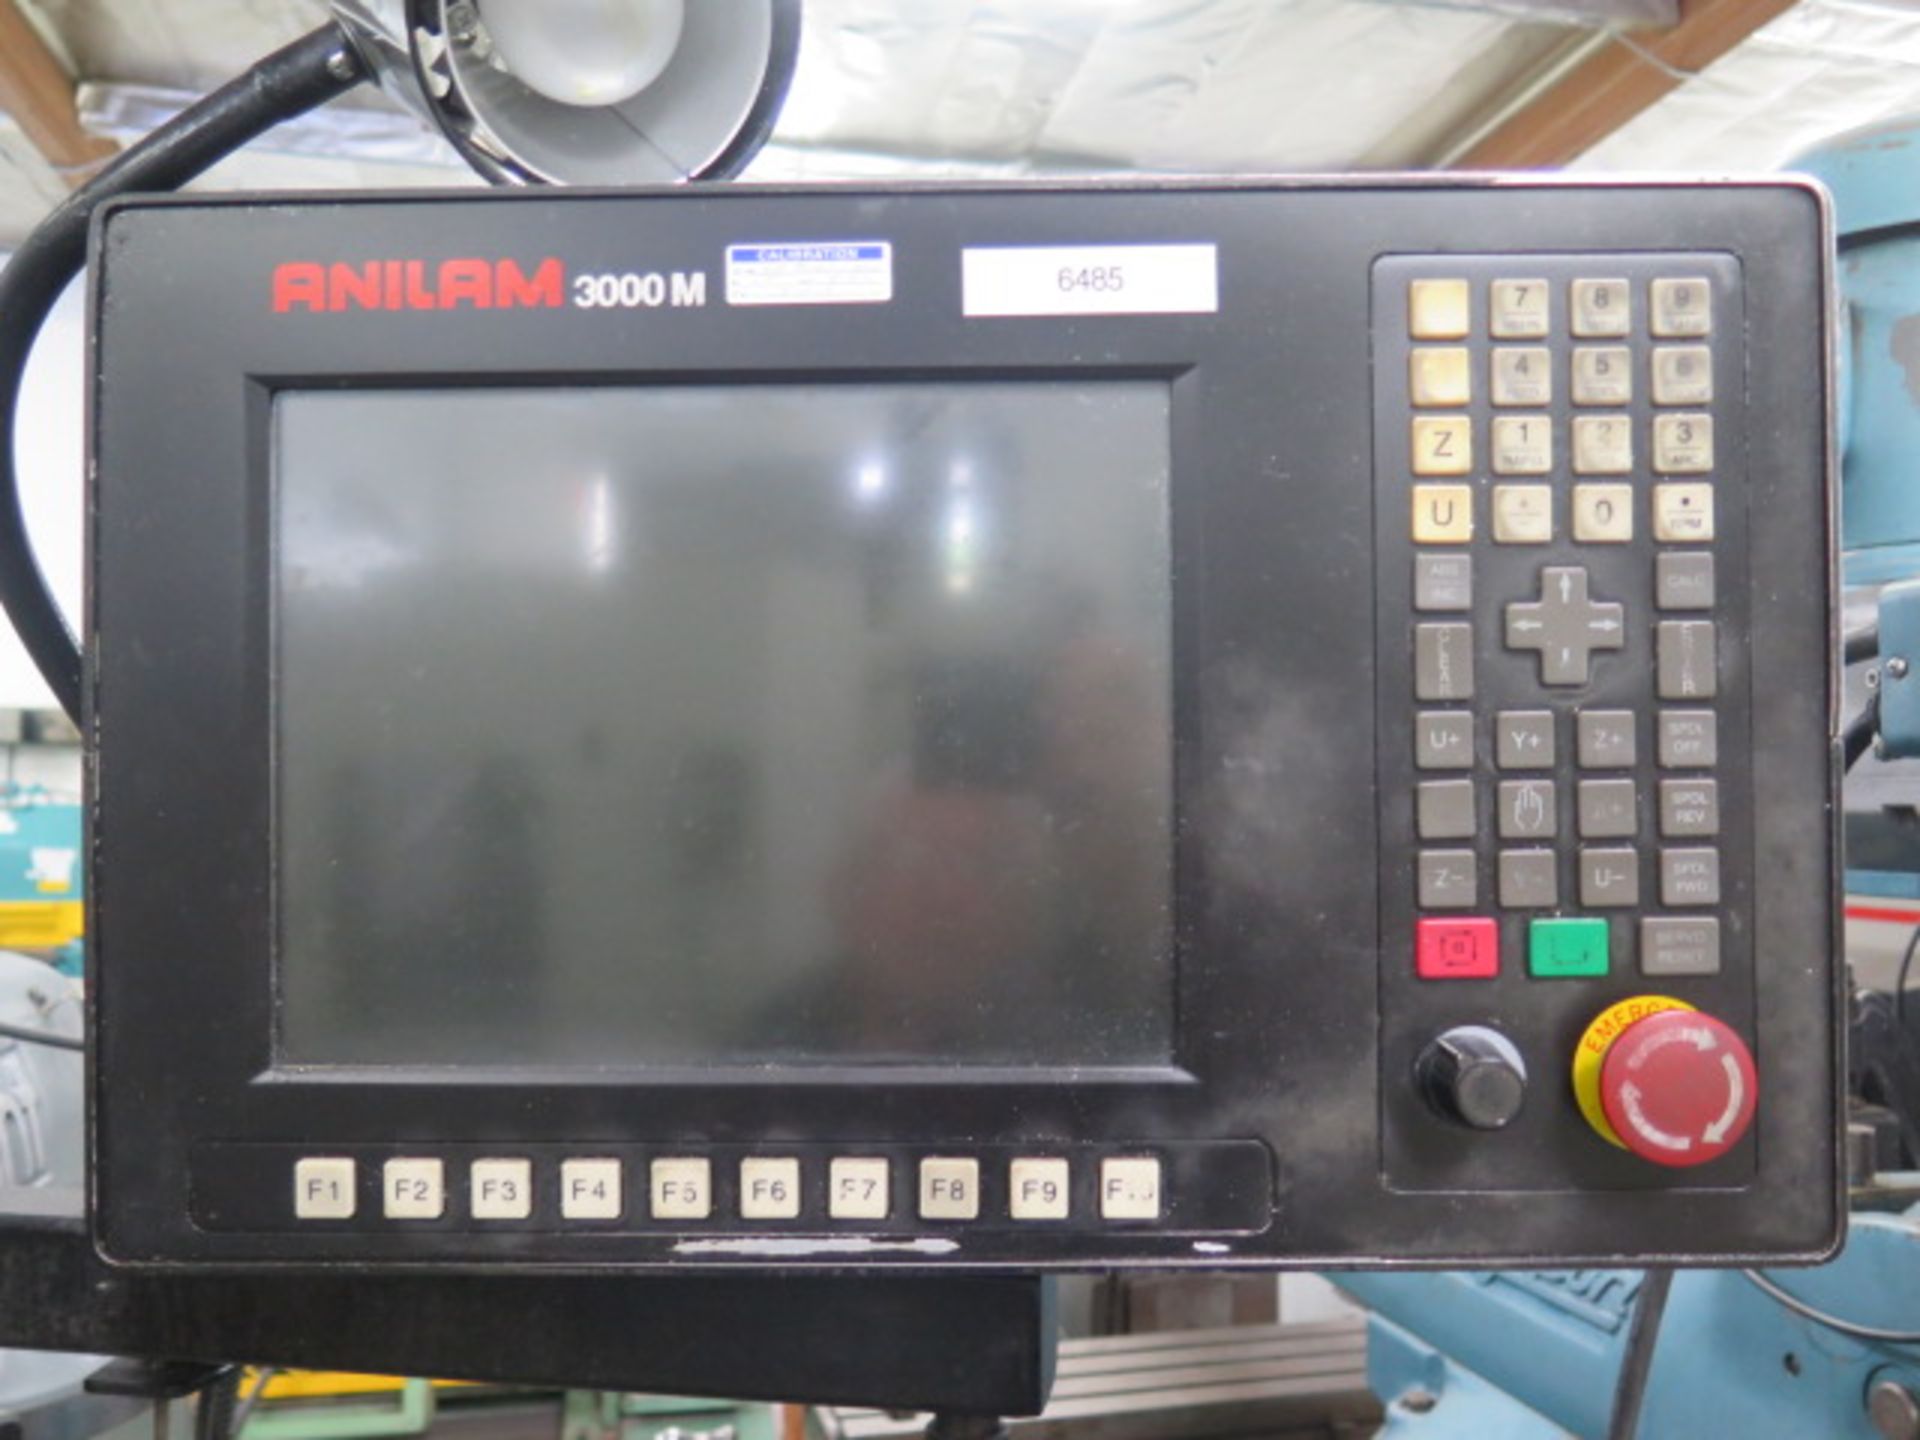 Aliant 2-Axis CNC Vertical Mill s/n 72042329 w/ Anilam 3000M CNC Controls, 2Hp Motor, 60-4500 Dial - Image 4 of 16